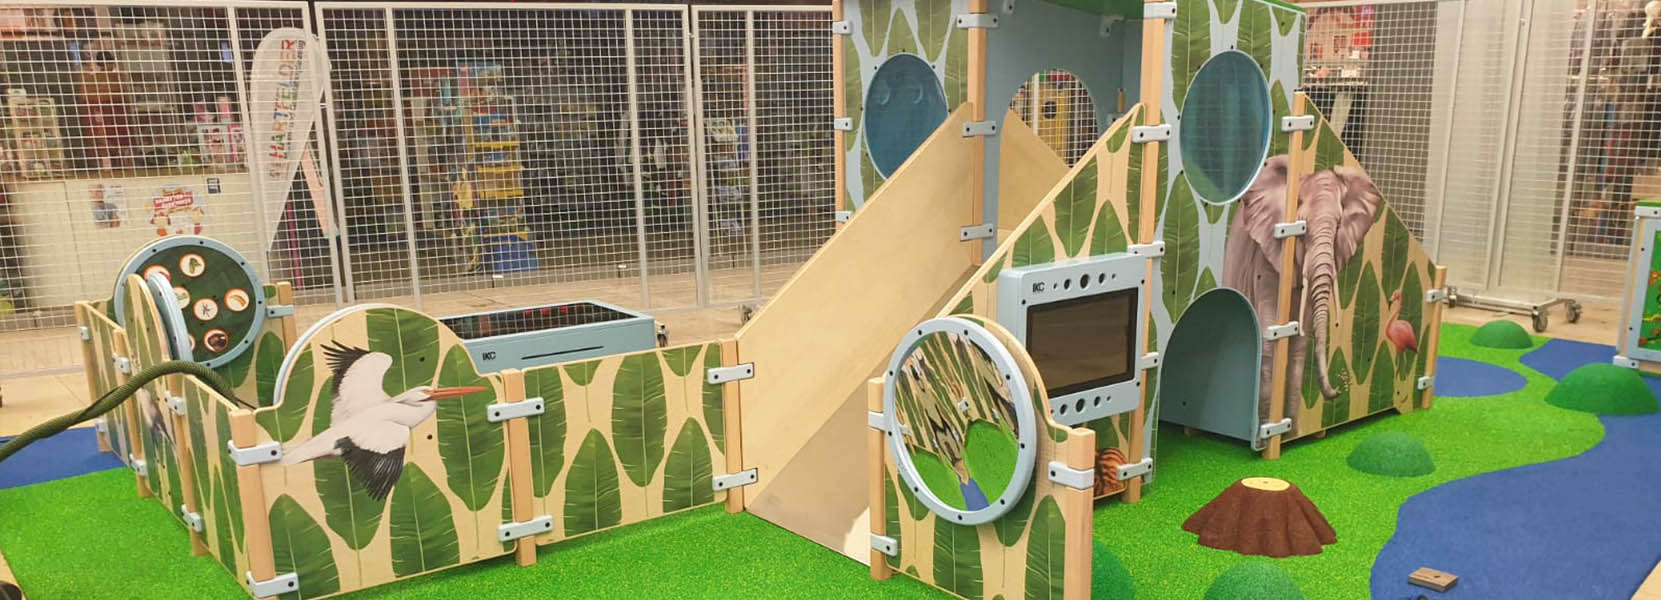 On this image you see a kids' corner with a playhouse and wall games